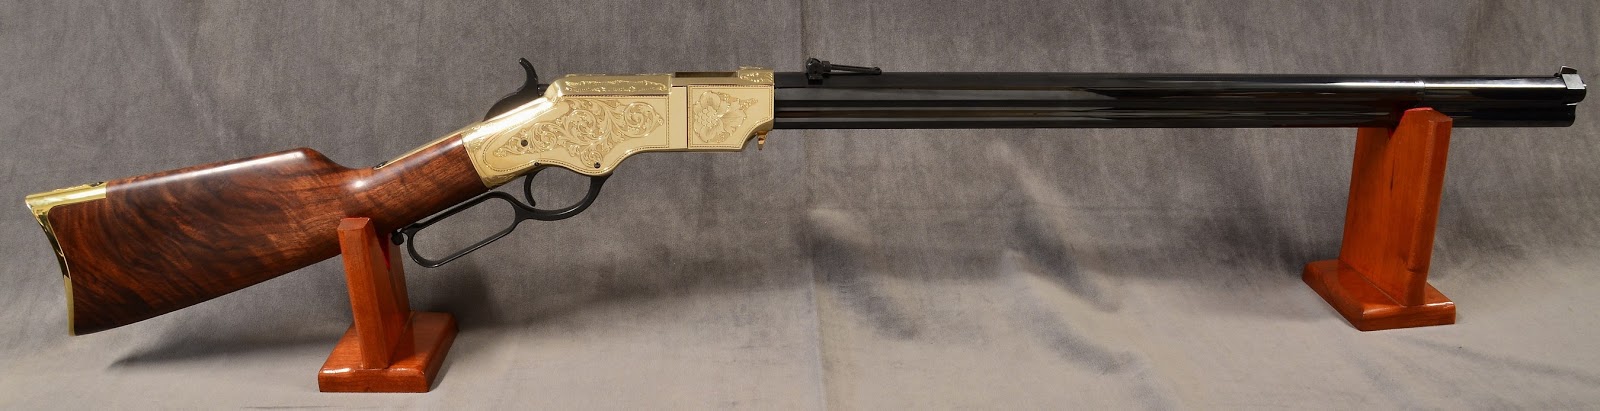 henry repeating arms serial numbers